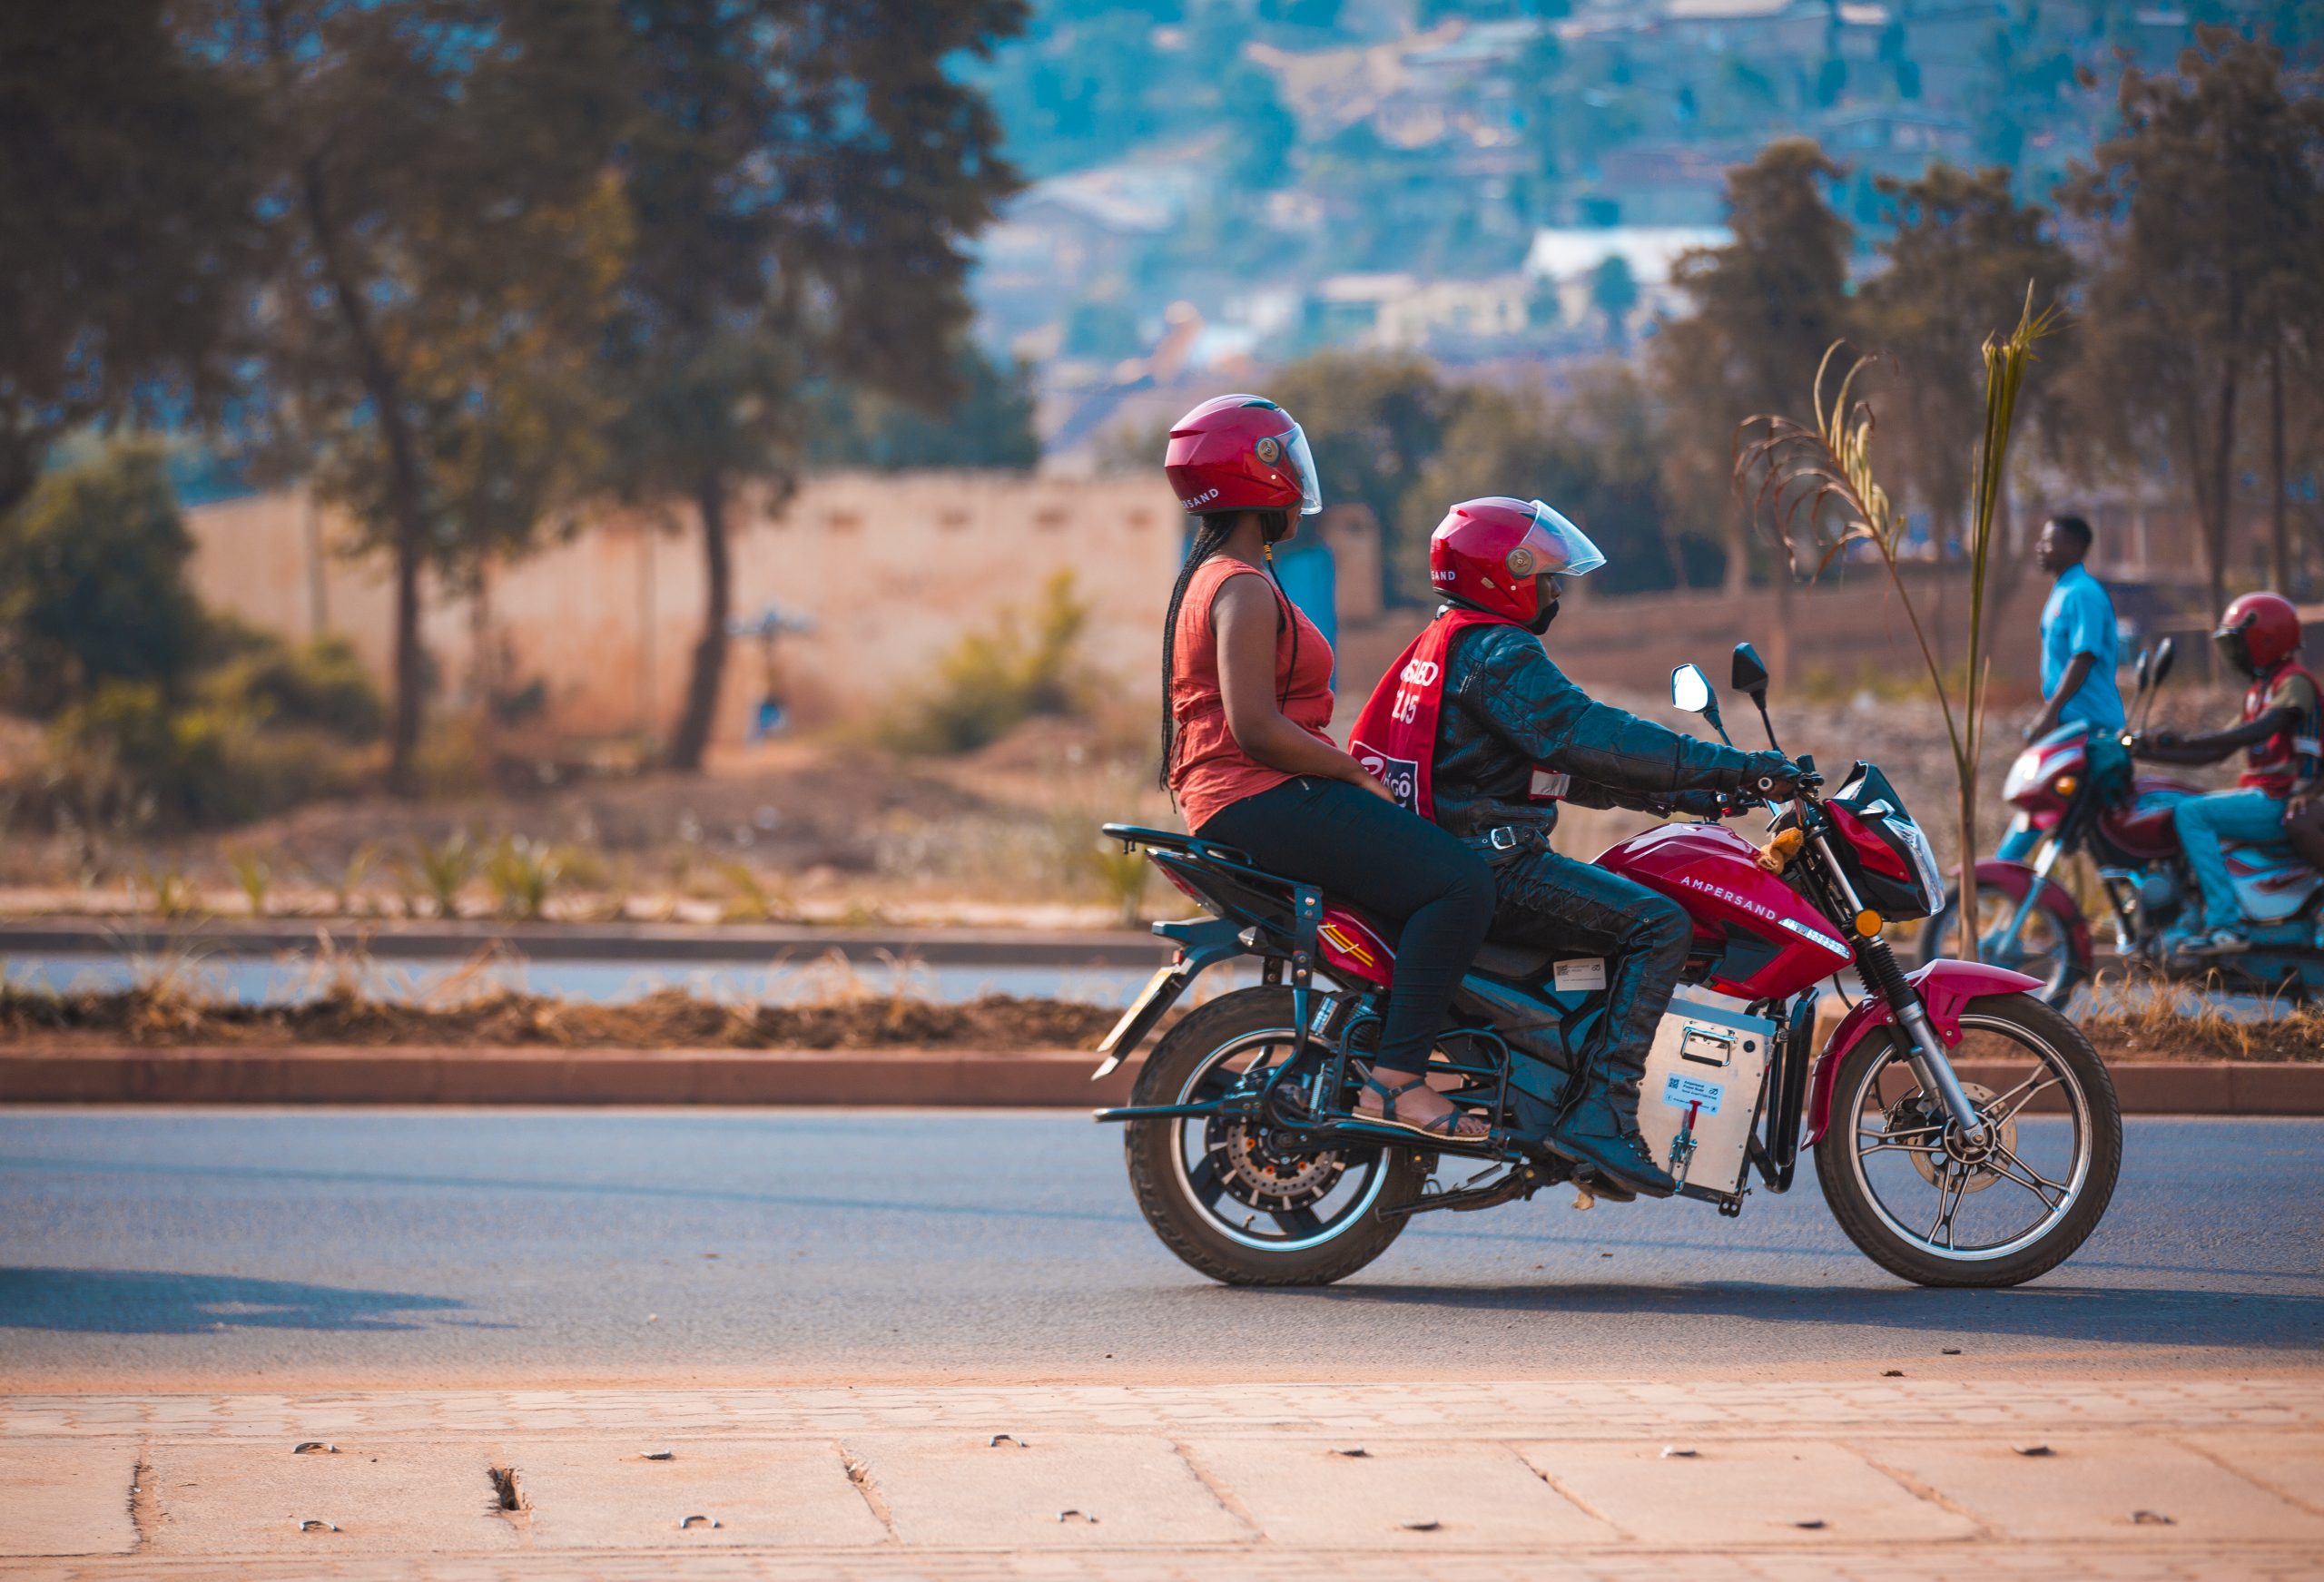 Ampersand, Africa’s First Electric Motorcycle Startup, Secures 3.5m